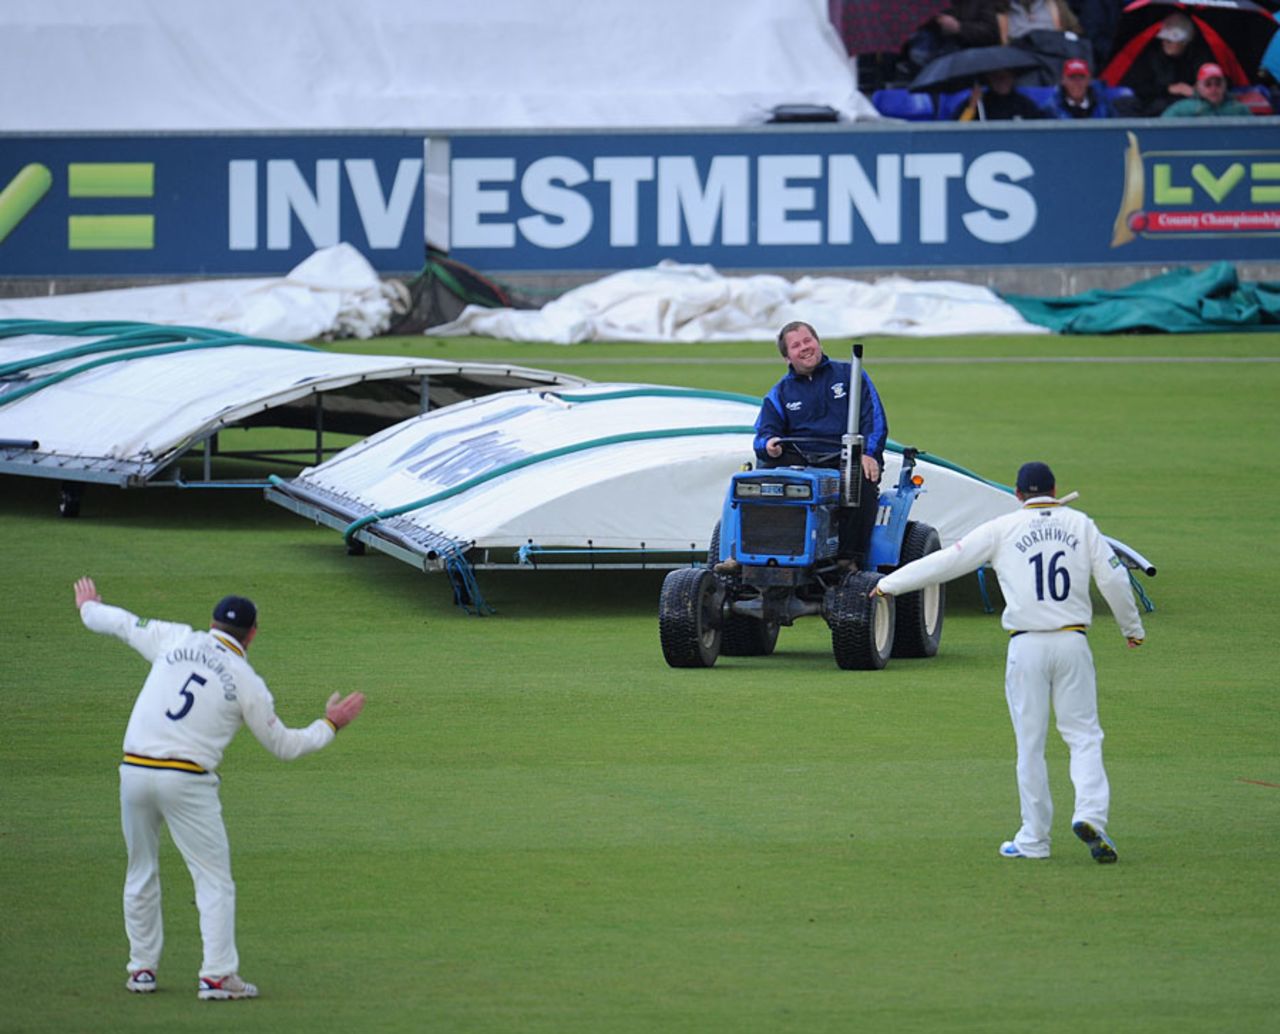 The Durham groundsman gets directed off the outfield, Durham v Nottinghamshire, County Championship, Division One, Chester-le-Street, September 18, 2013